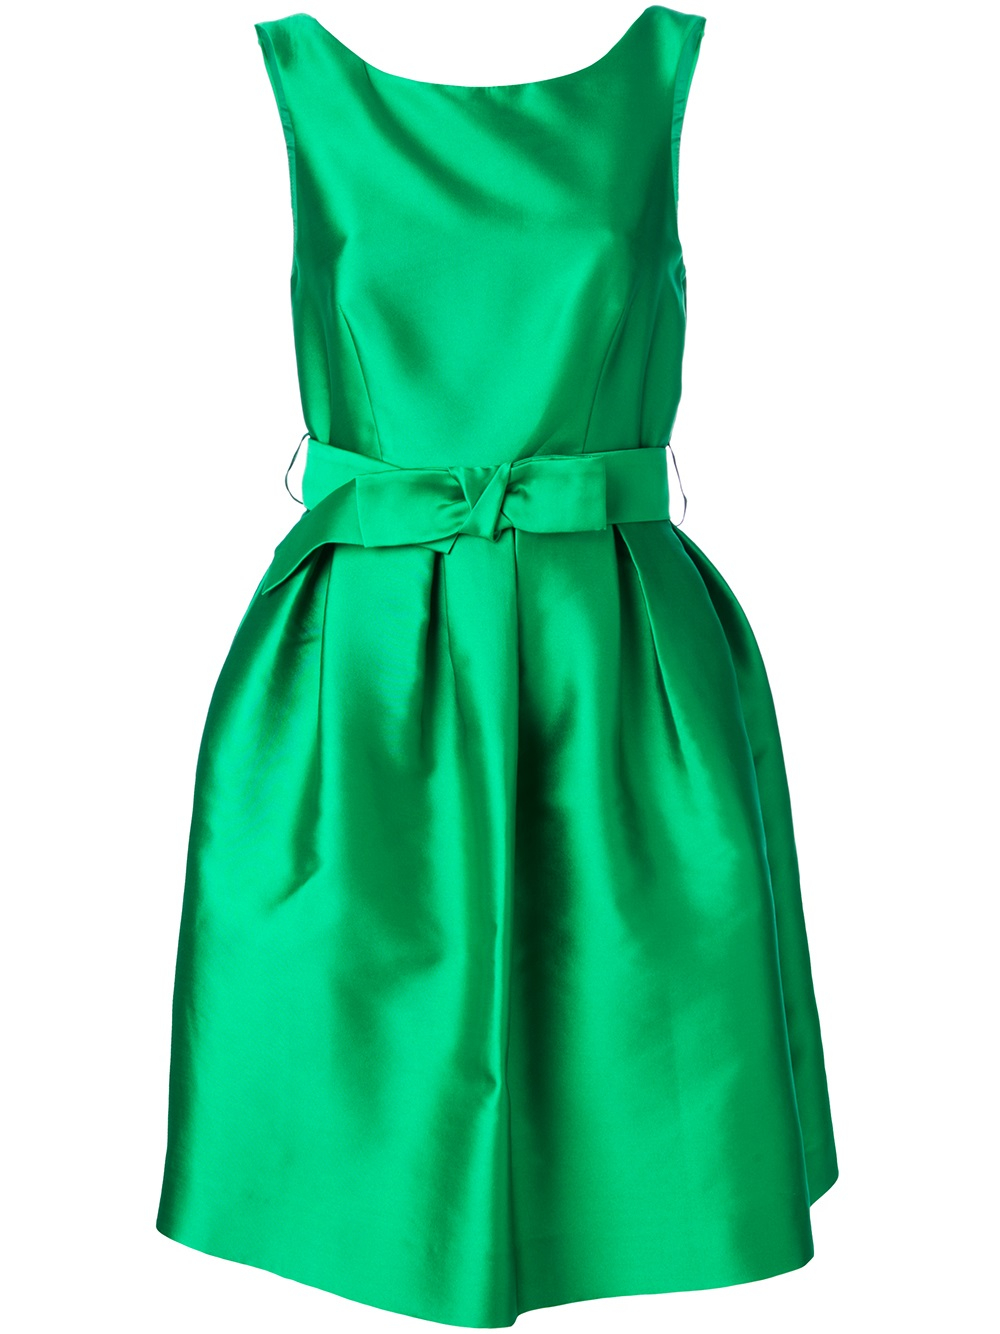 Lyst - P.A.R.O.S.H. Bow Tie Dress in Green